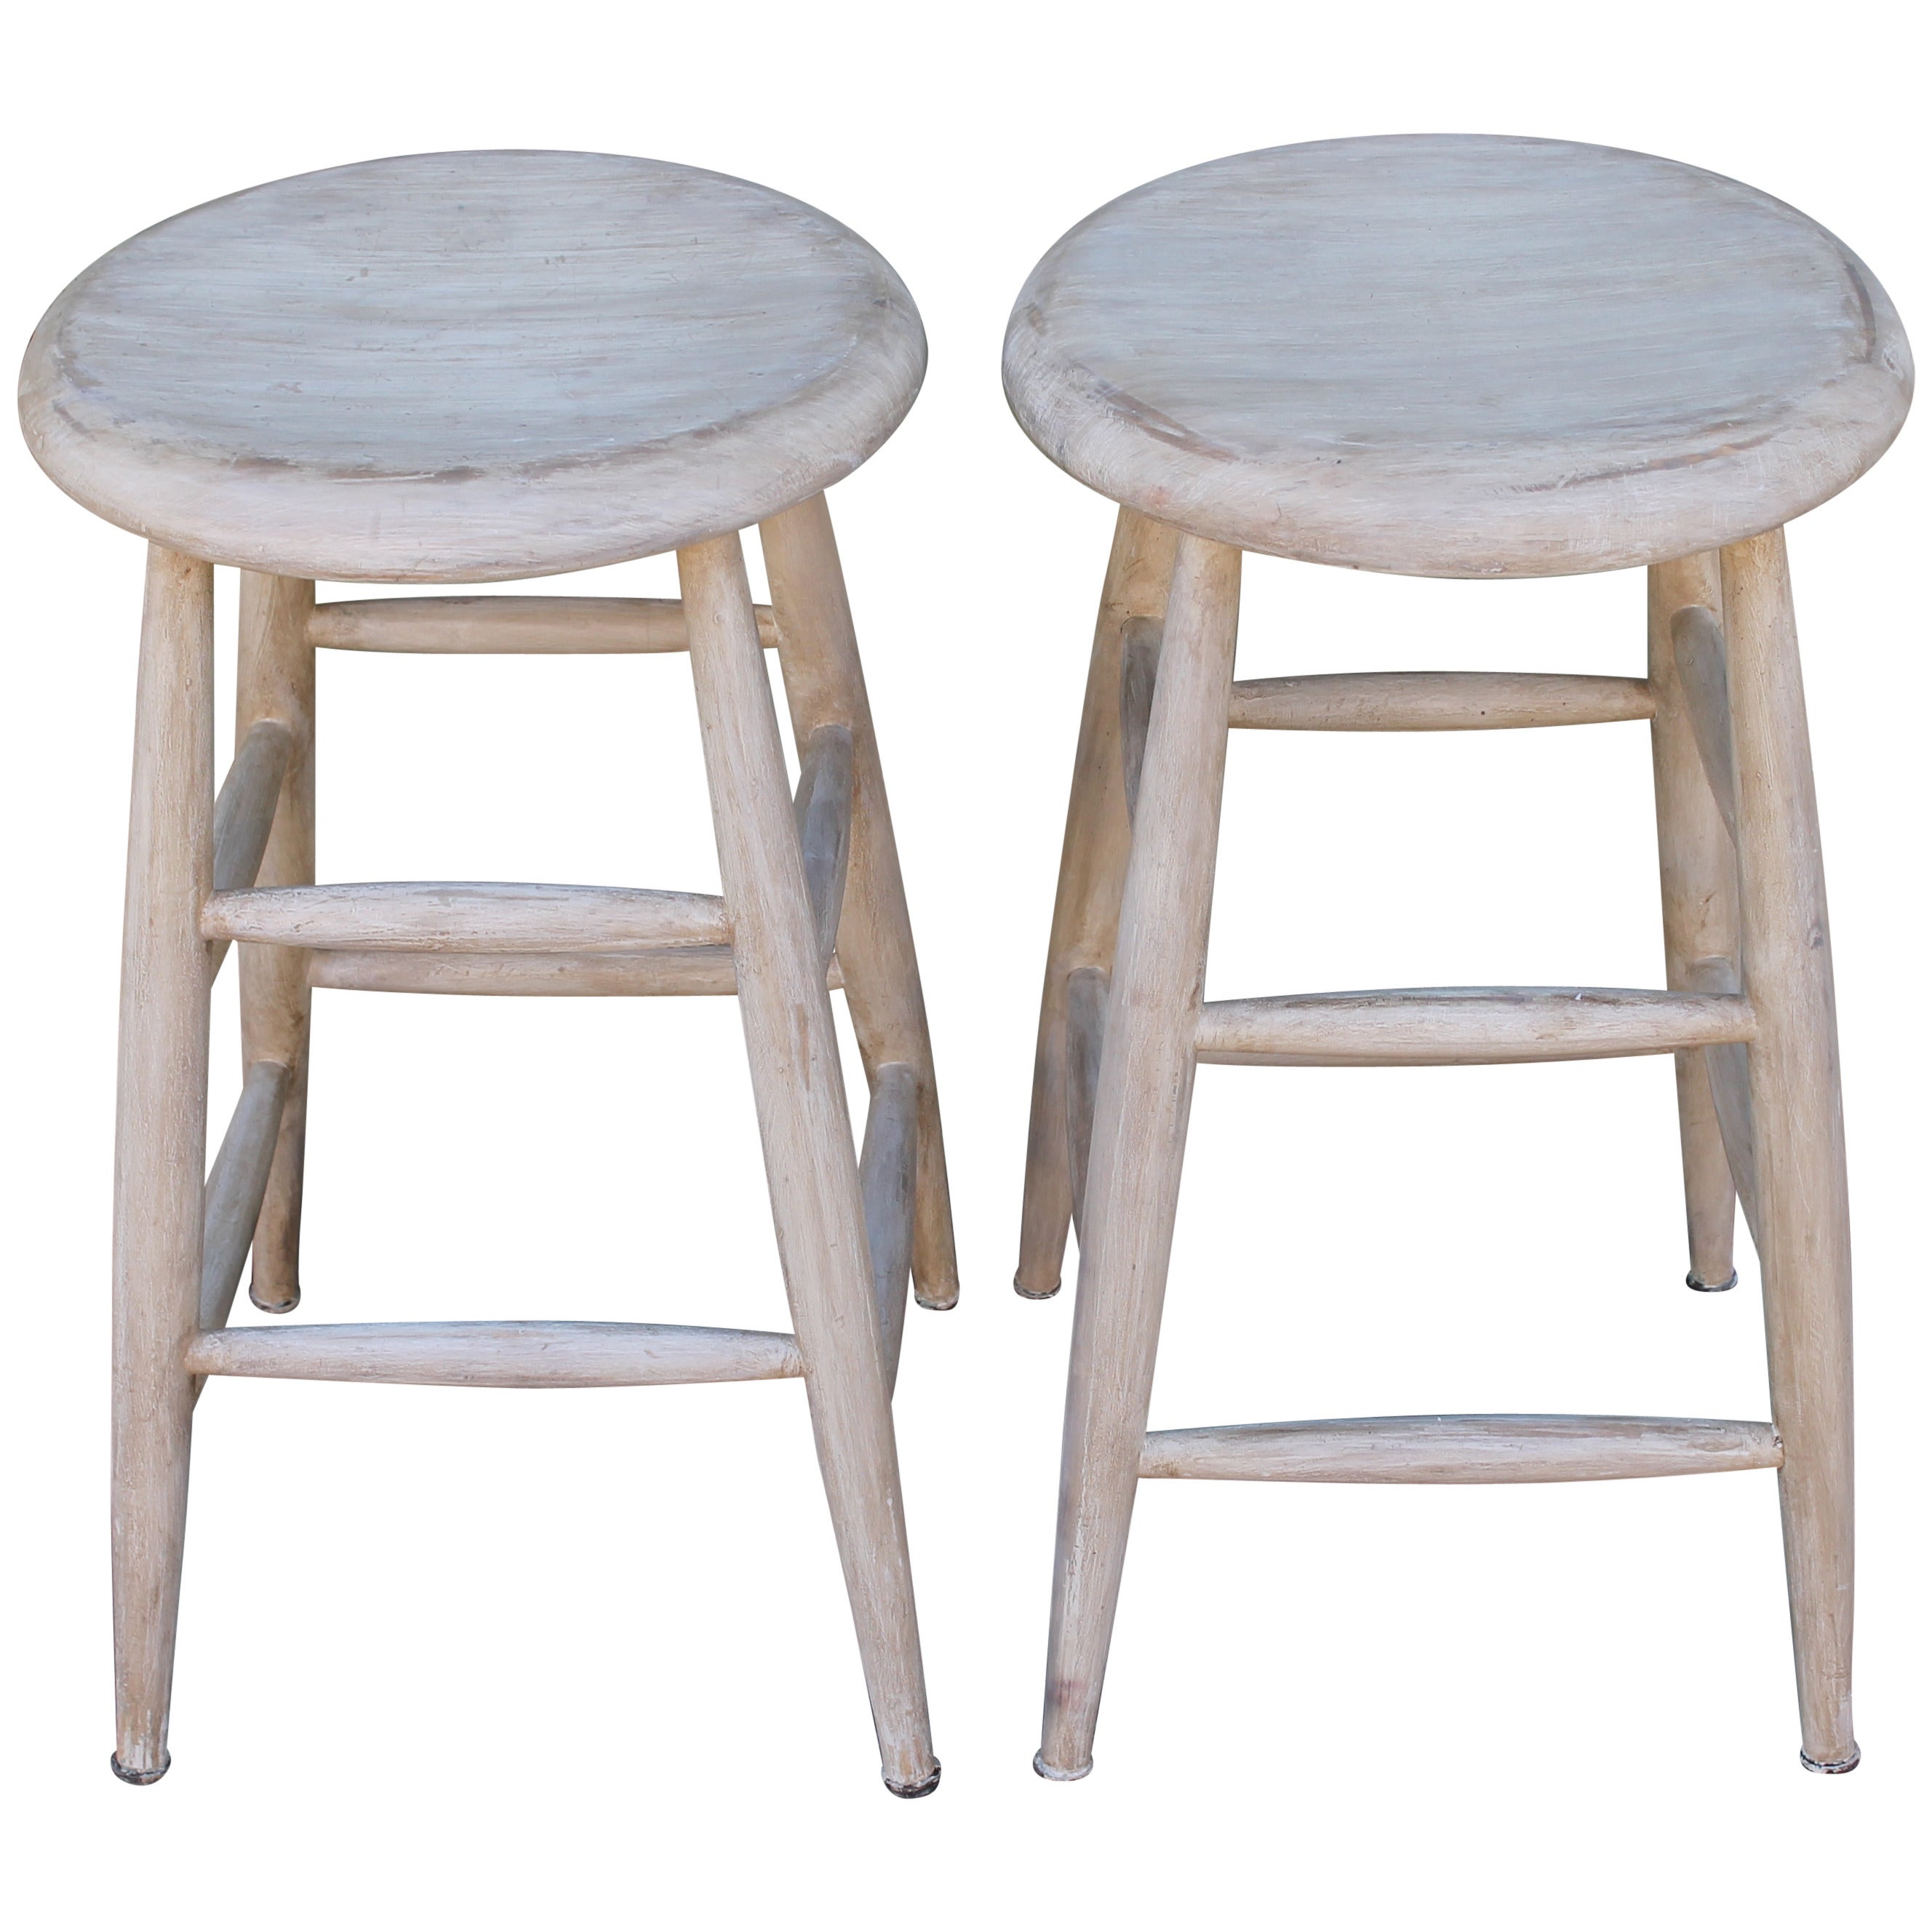 Pair of White Painted Early 20th Century Bar Stools